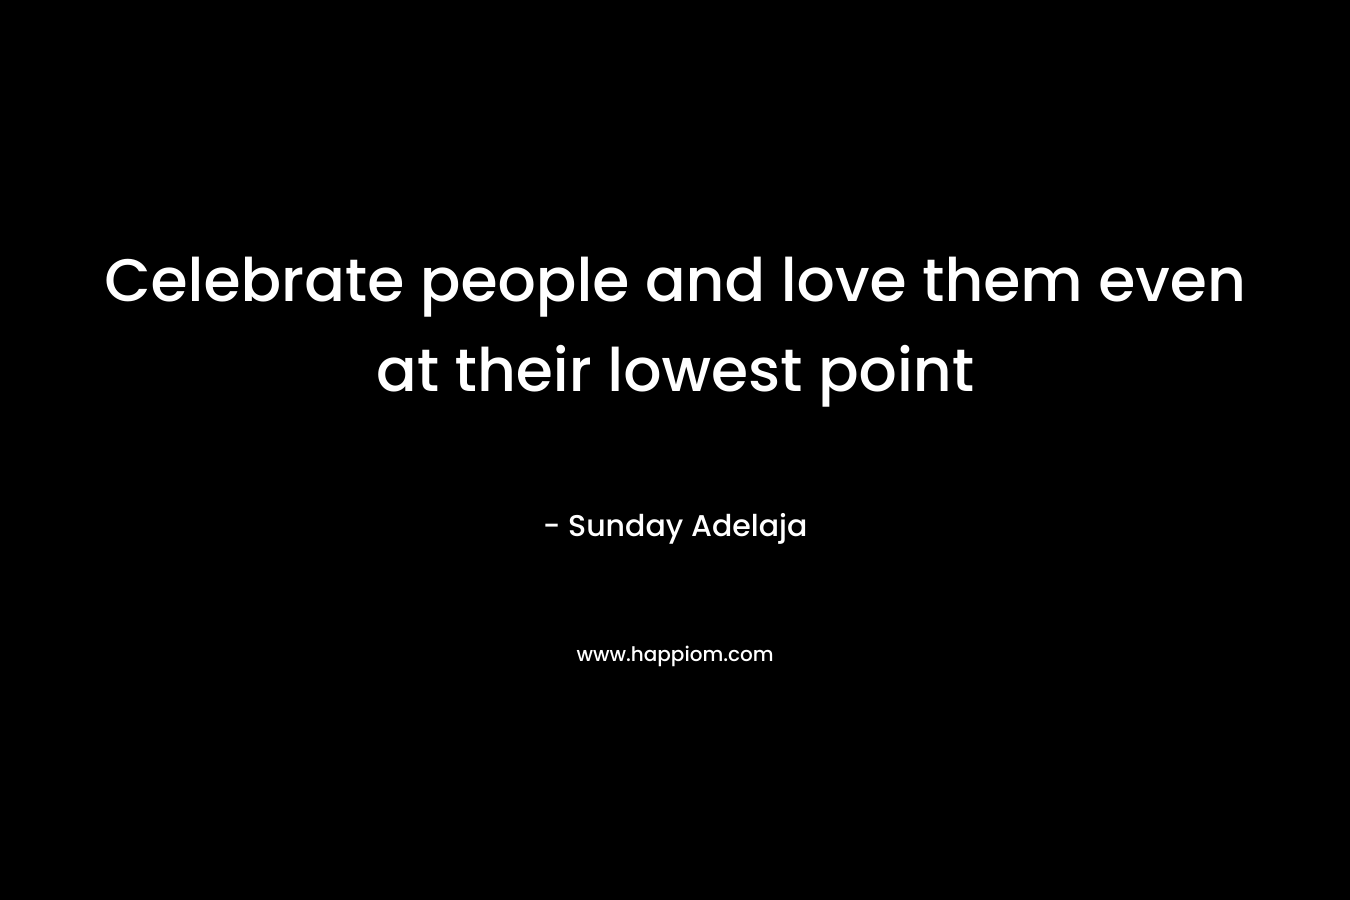 Celebrate people and love them even at their lowest point